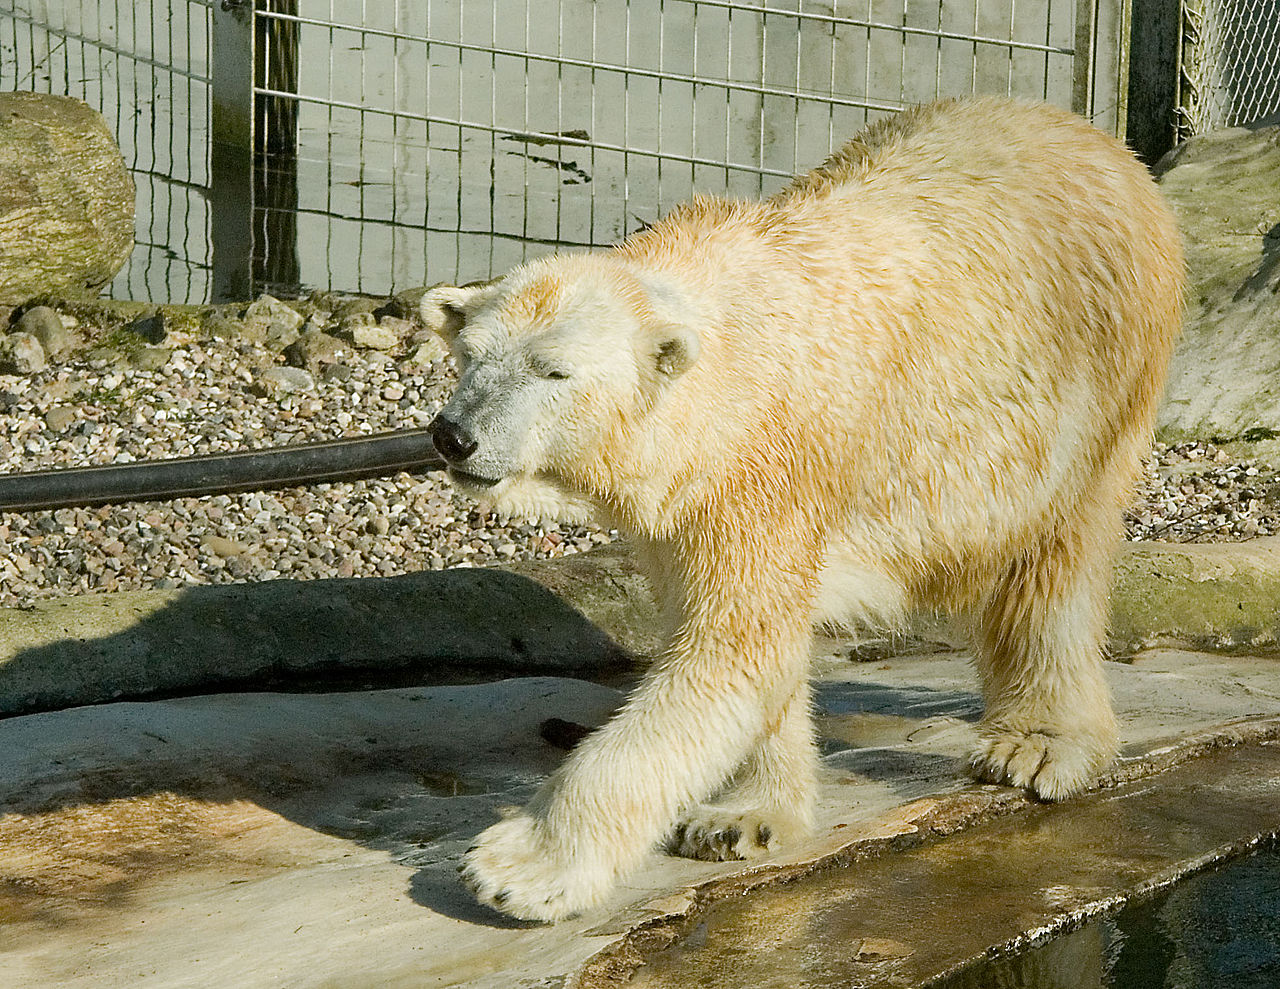 How this study about captive polar bears shows the sad life of animals in captivity